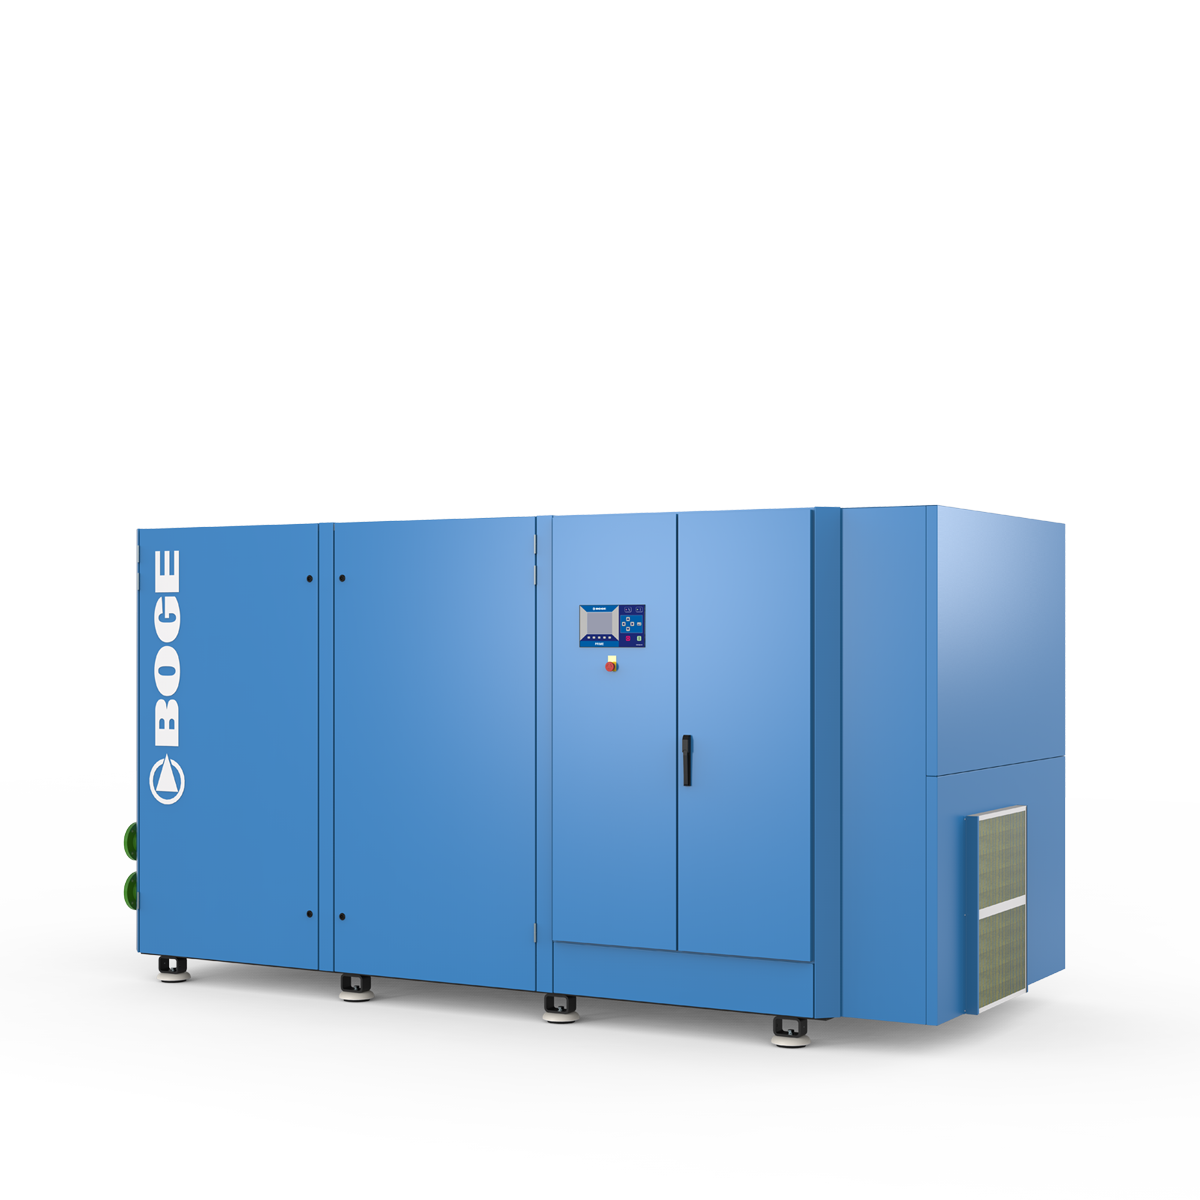 Screw Compressor SO Series up to 355 kW